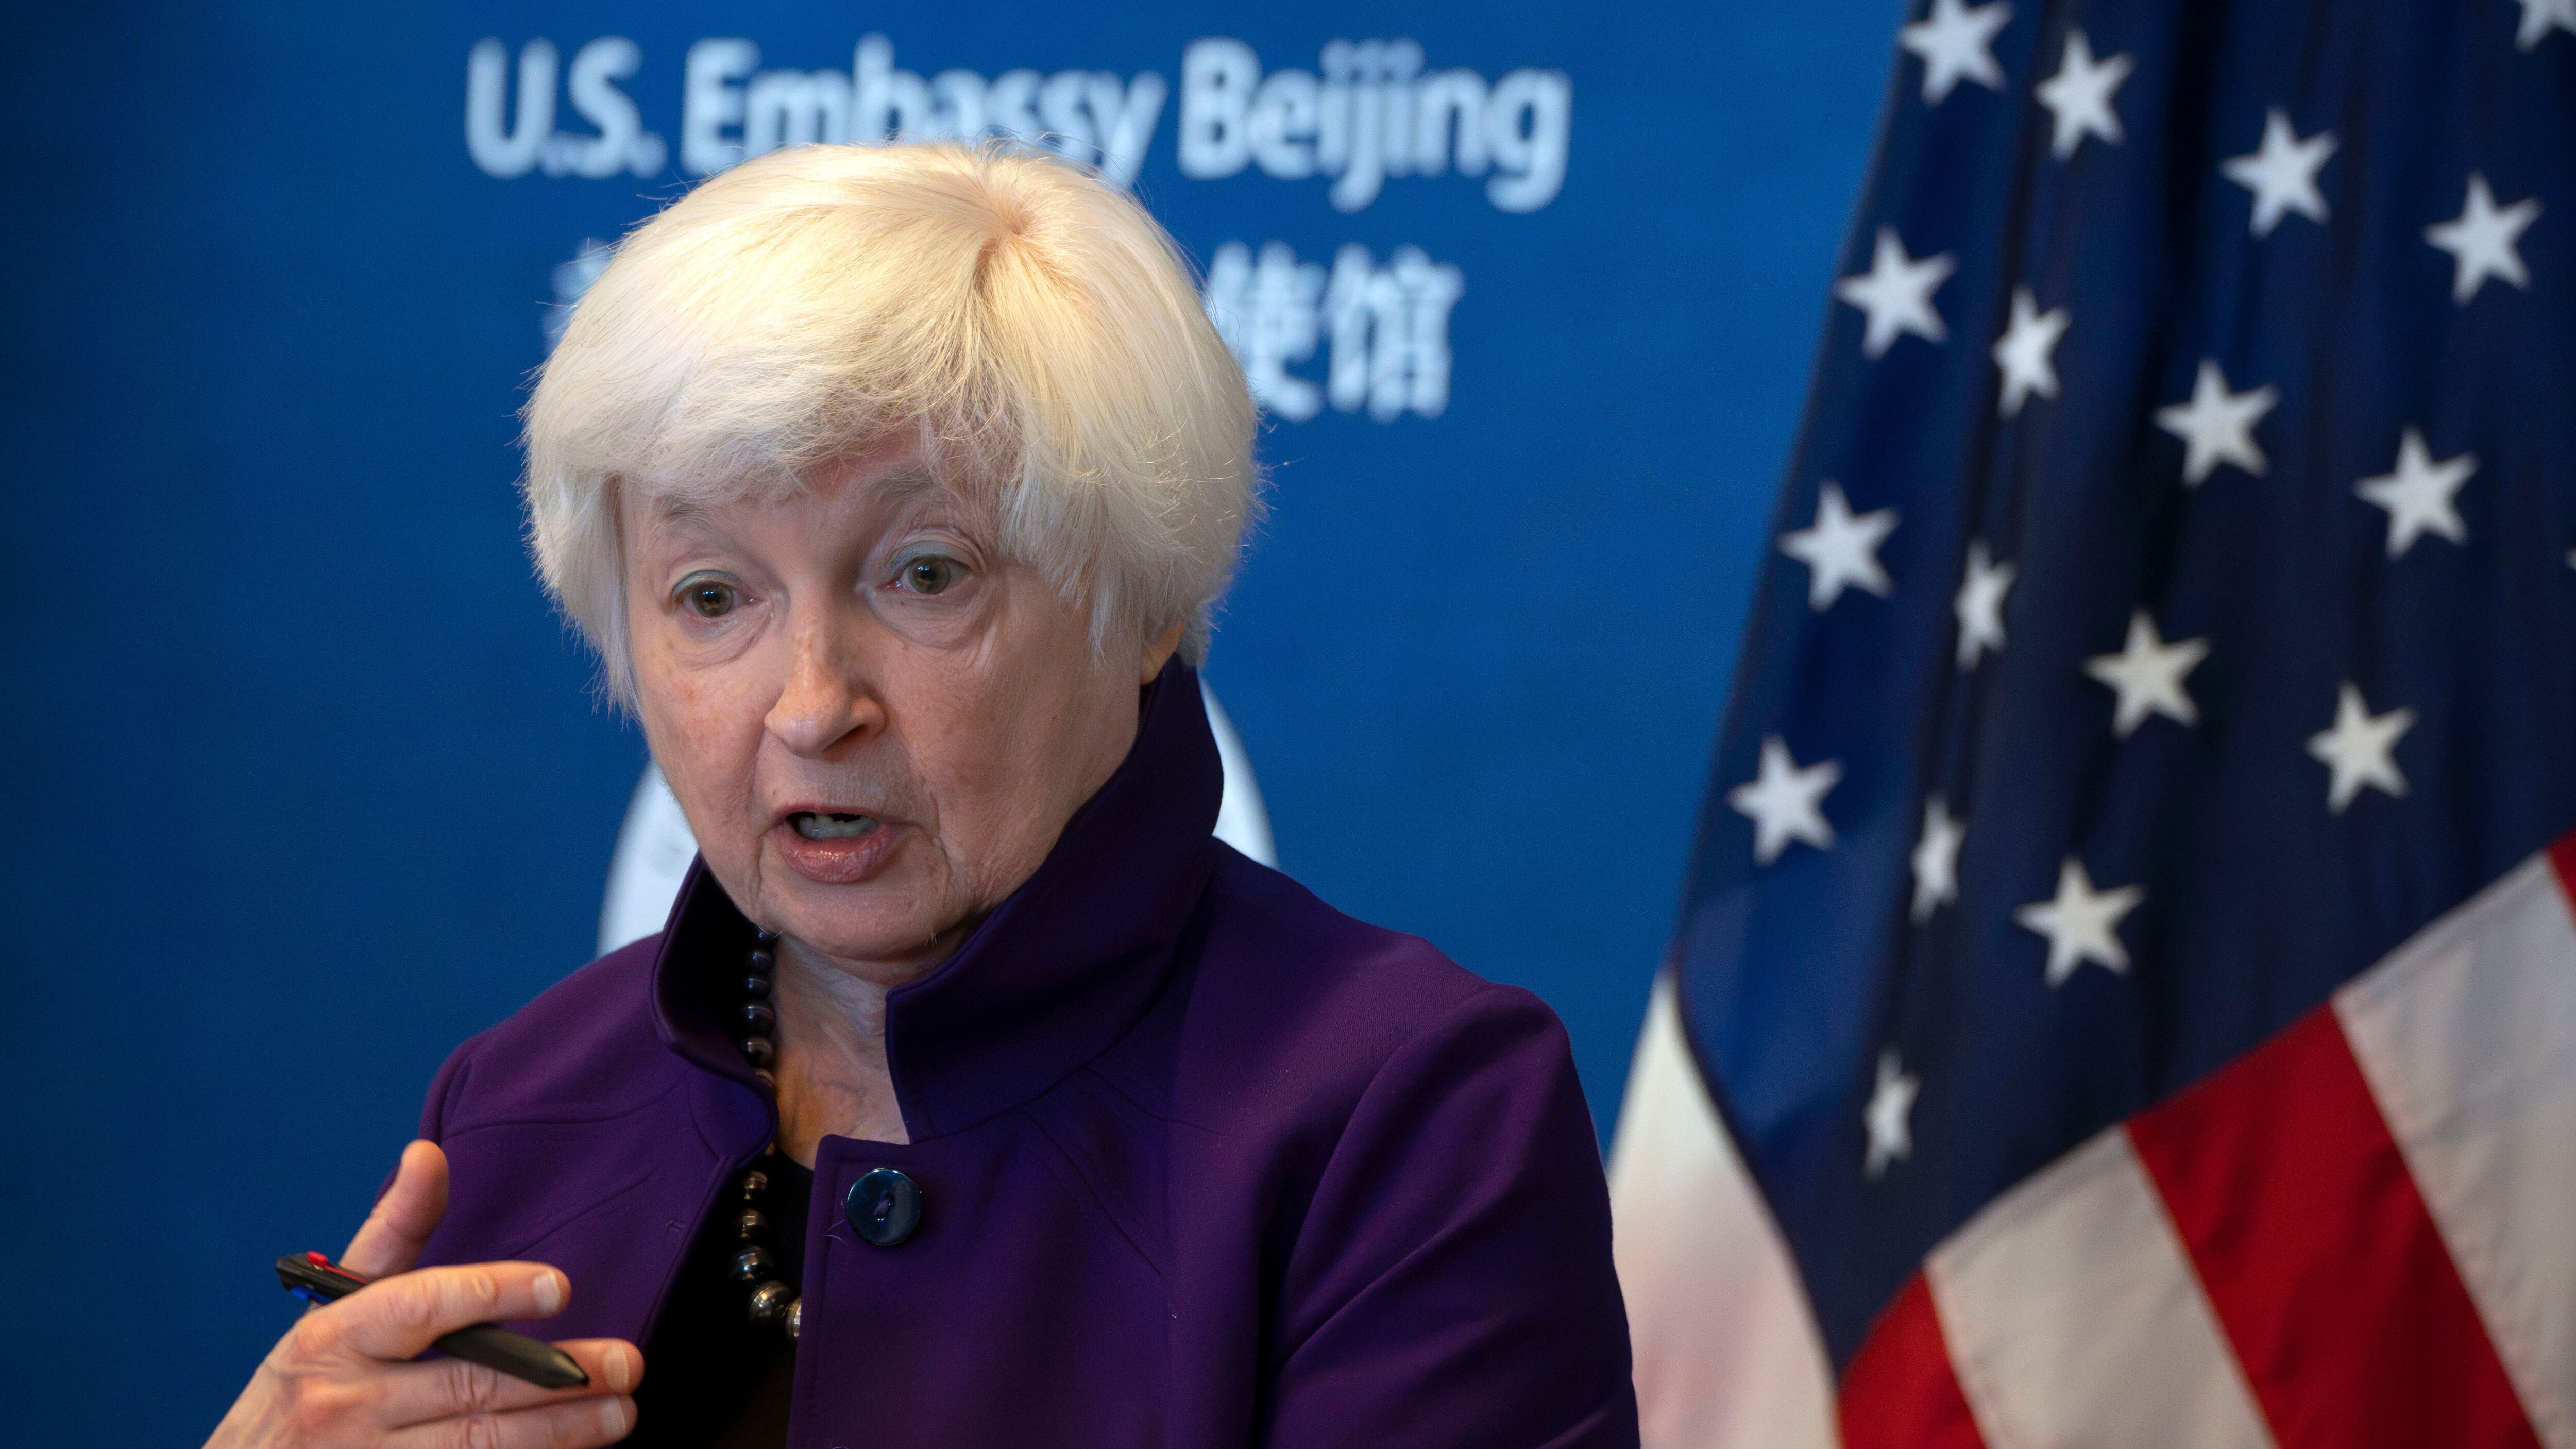 US treasury secretary Janet Yellen speaks during a press conference at the US Embassy in Beijing (Mark Schiefelbein/AP/PA)